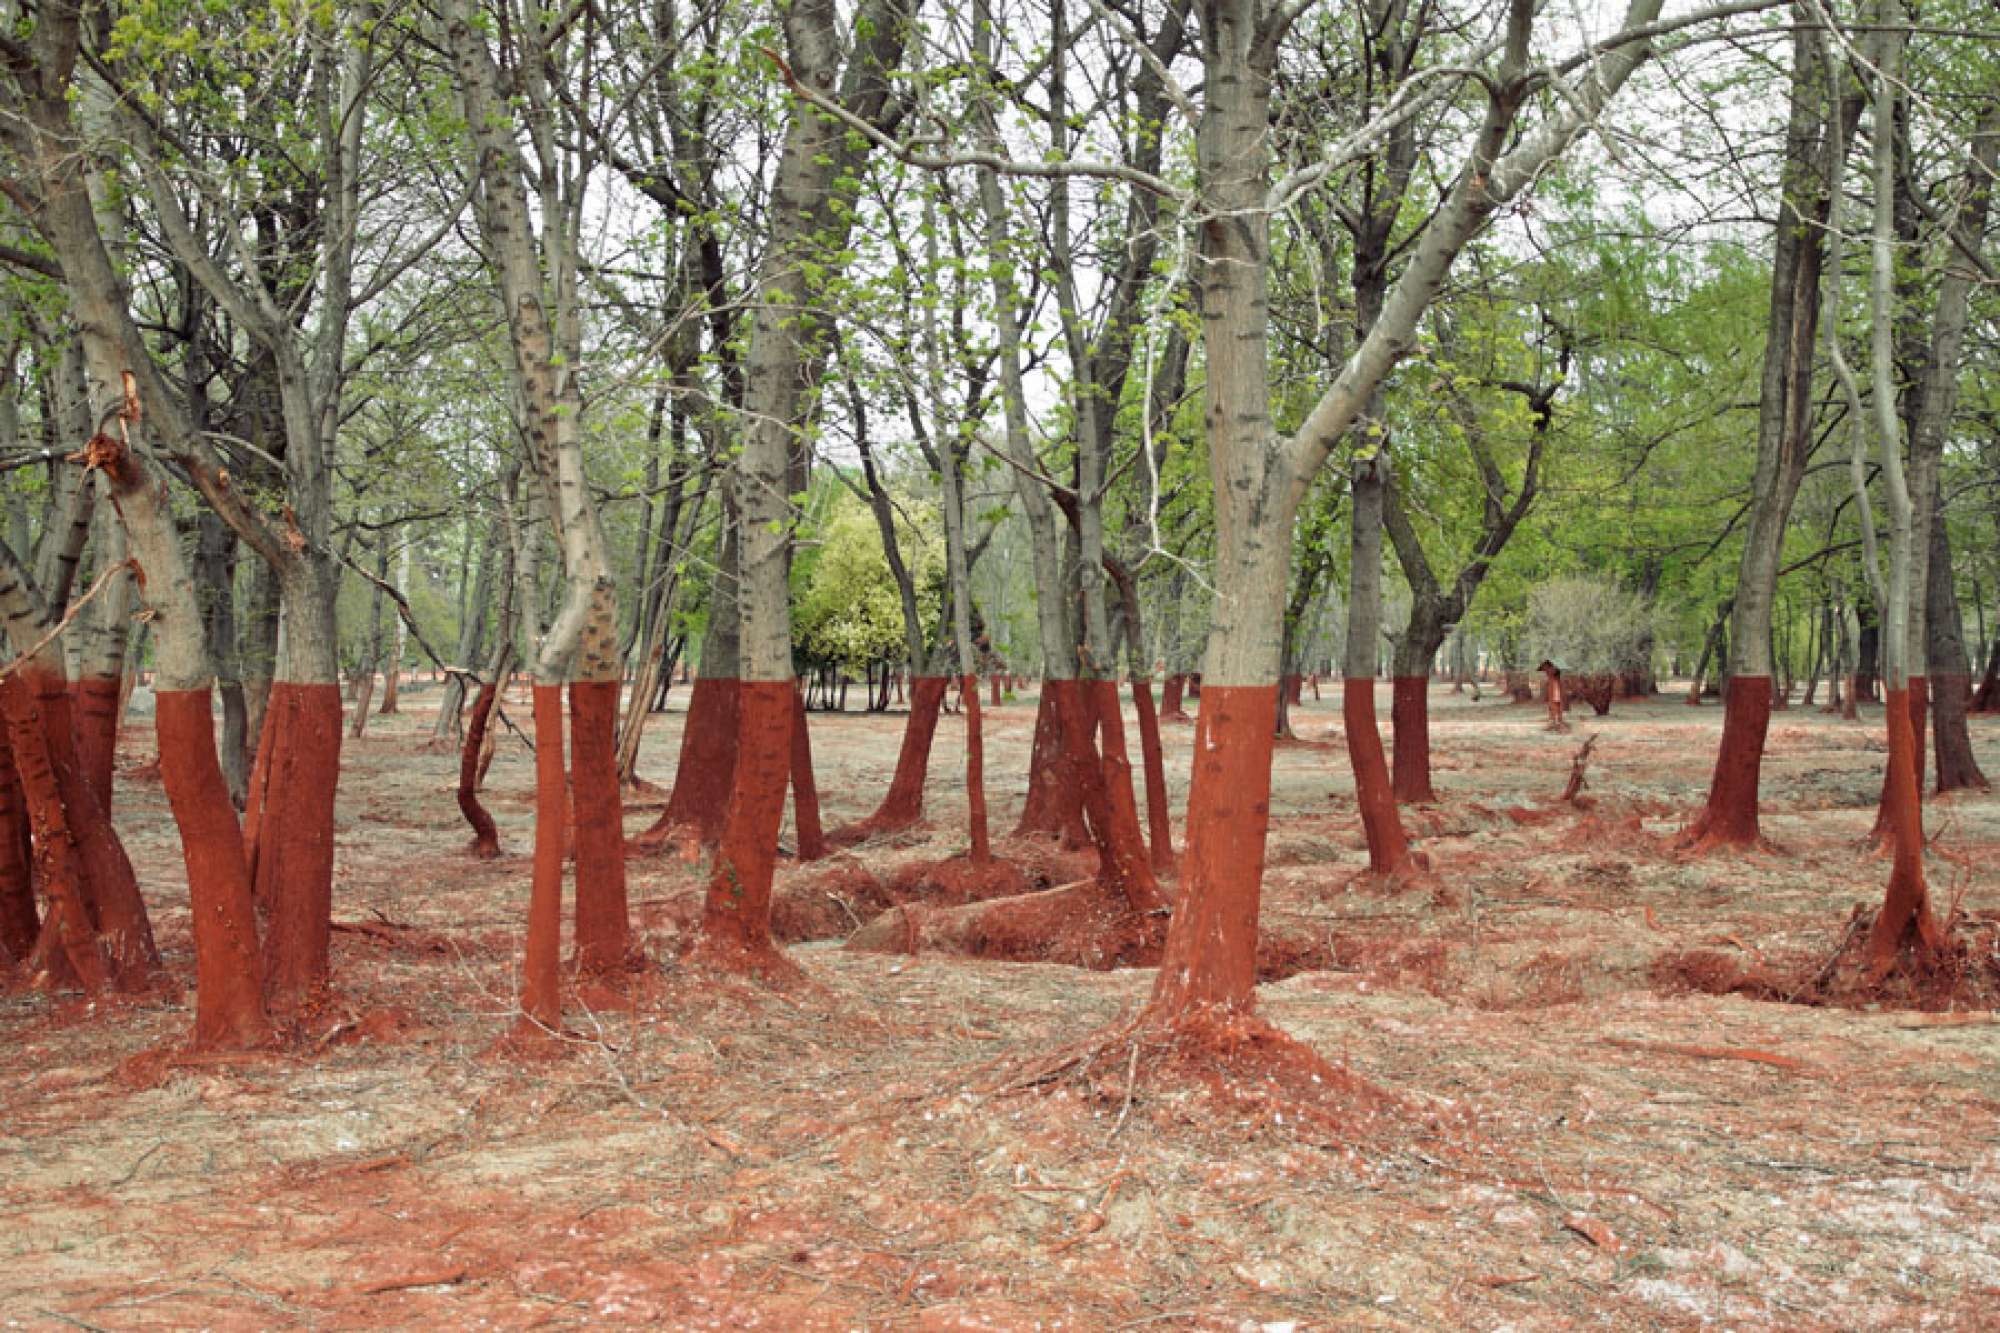 The aftermath of a 2010 toxic waste spill in Western Hungary. The red hue of aluminum byproducts makes the landscape look insane.